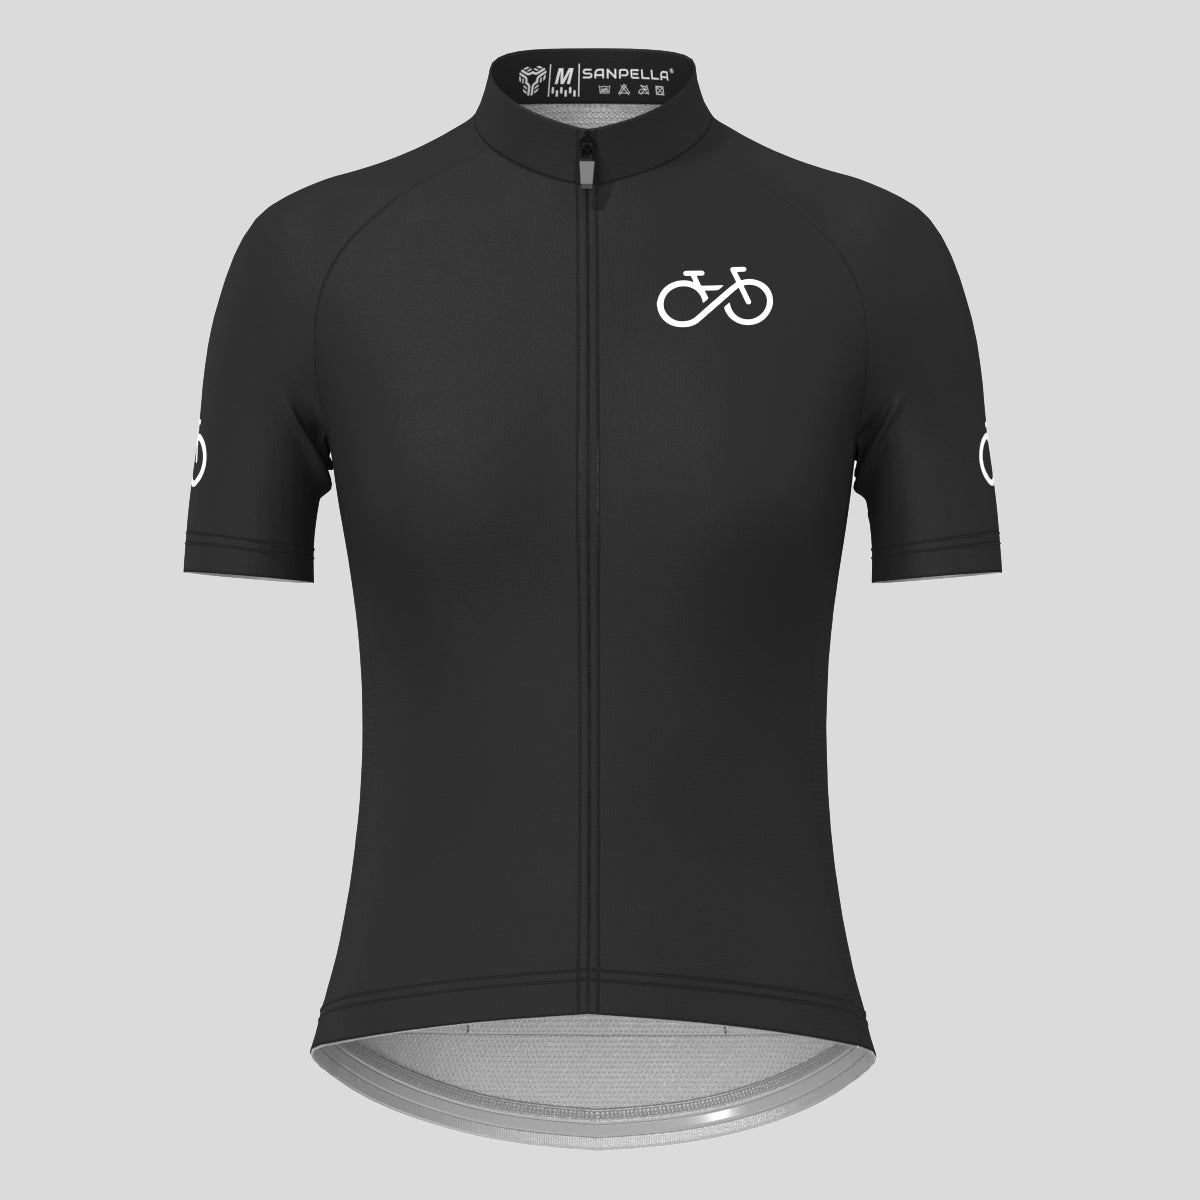 Ride Forever Women's Cycling Jersey - Black